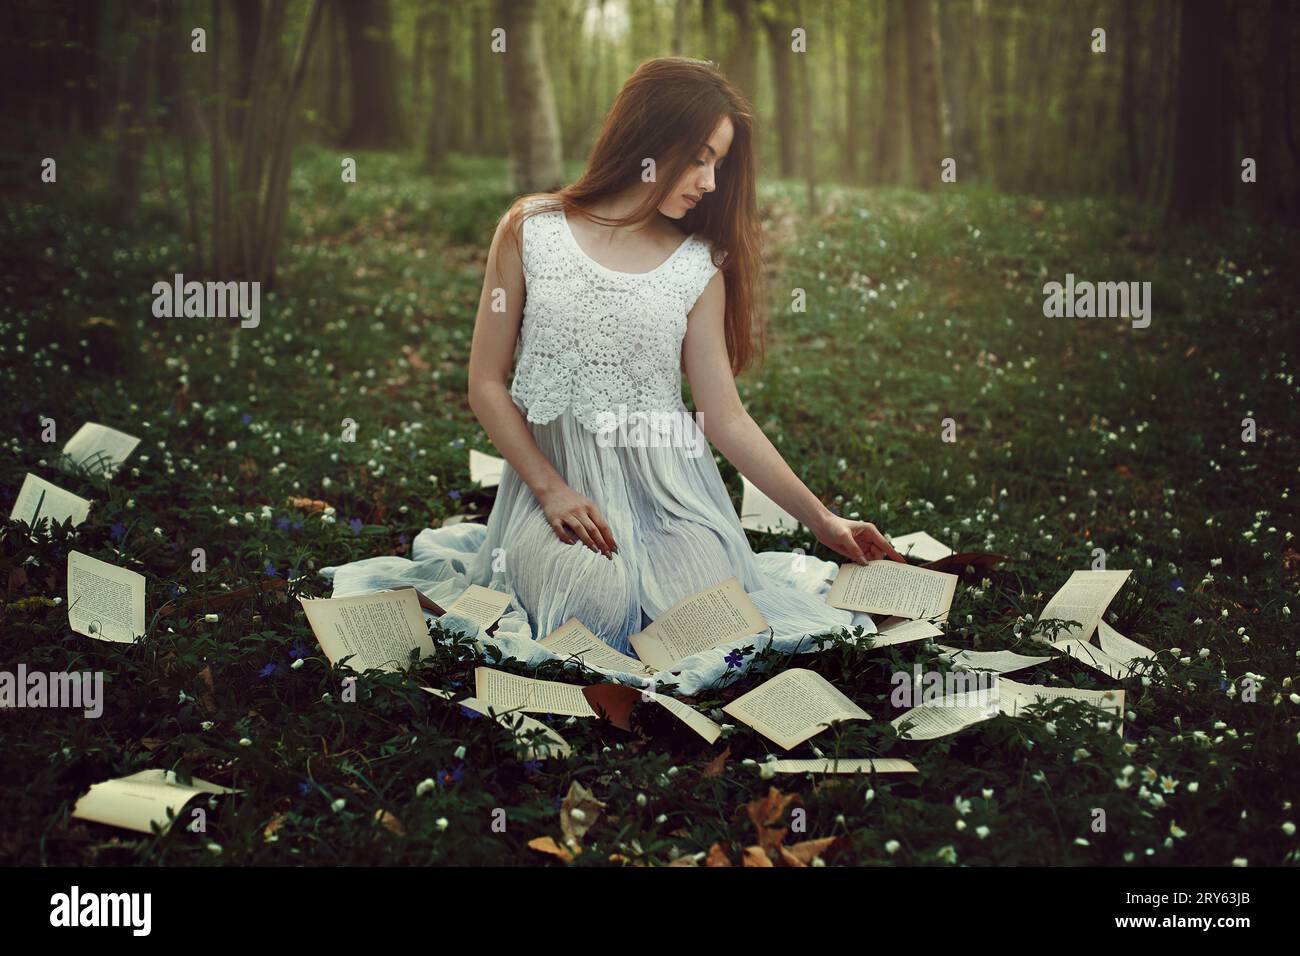 Pure innocent girl in fairy forest among book pages Stock Photo